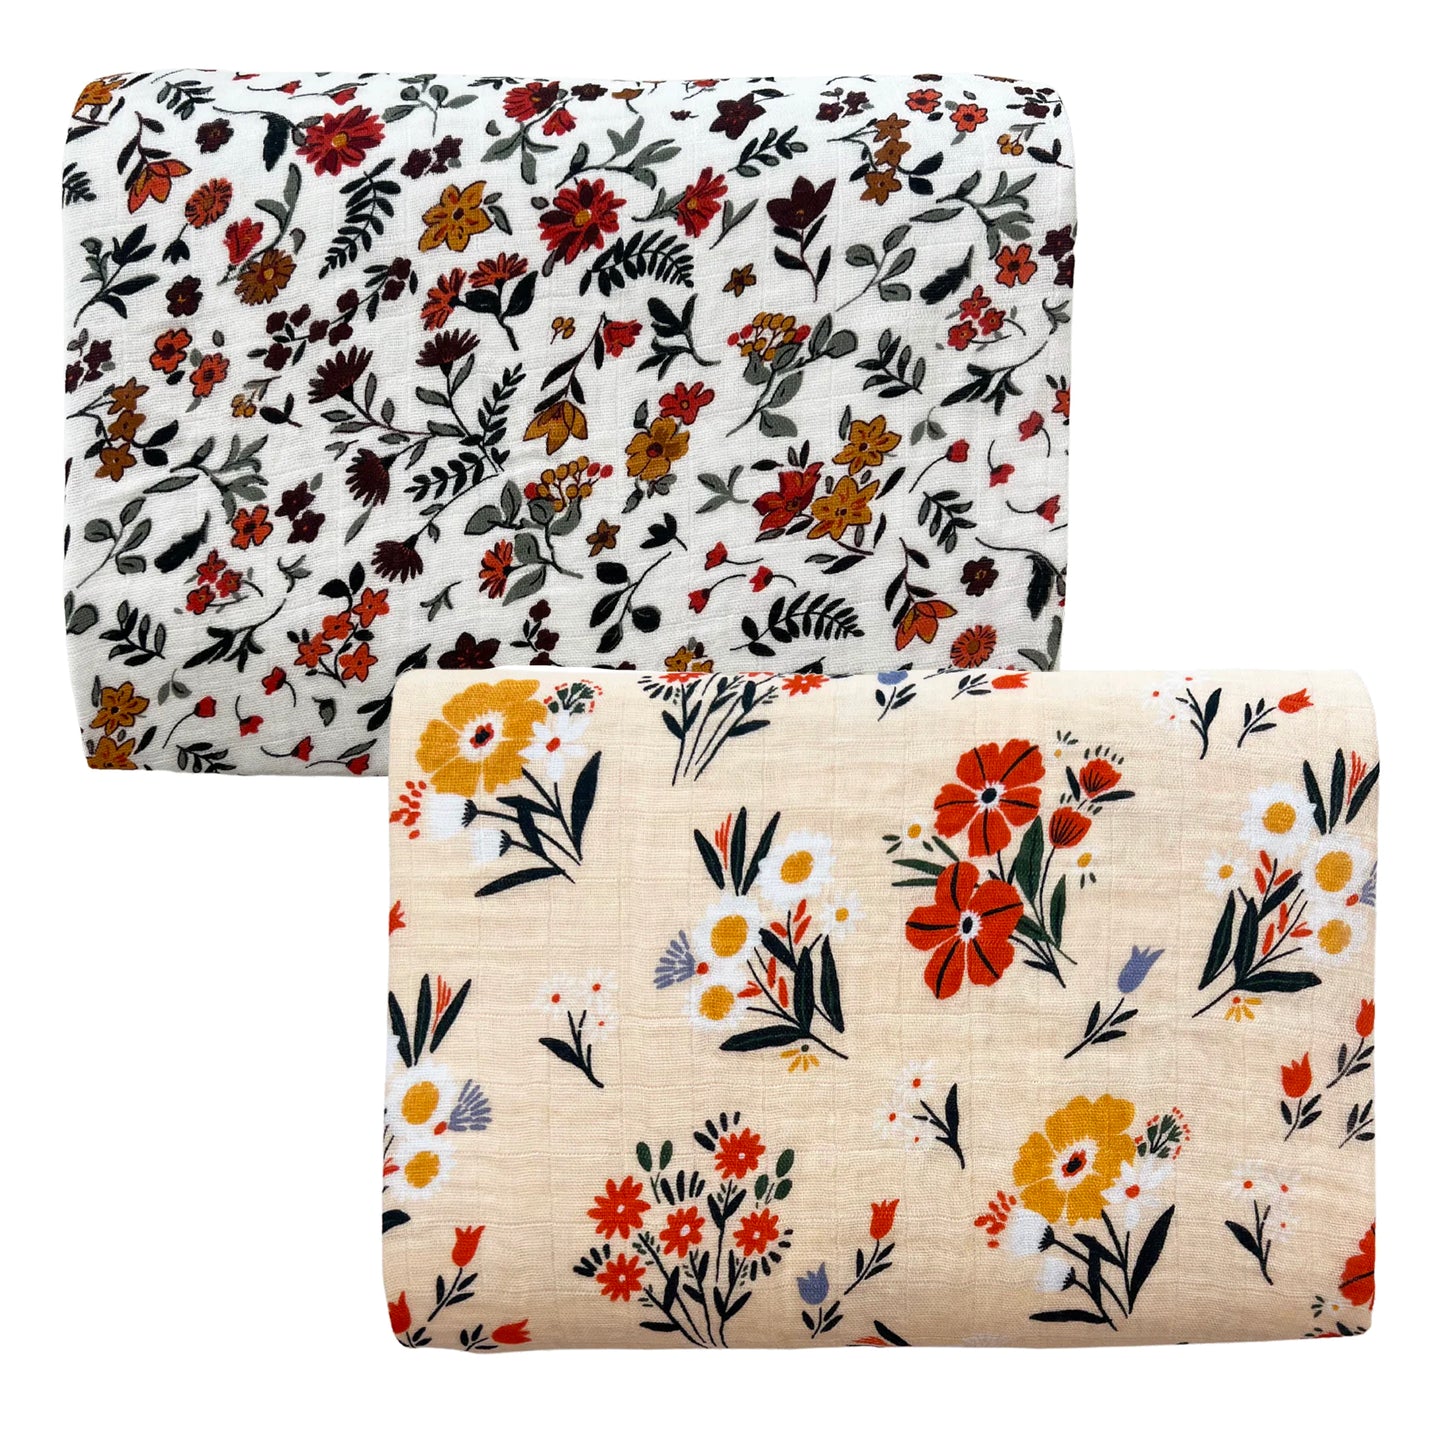 2-Pack Muslin Swaddles, Autumn Ditsy/Garden Floral